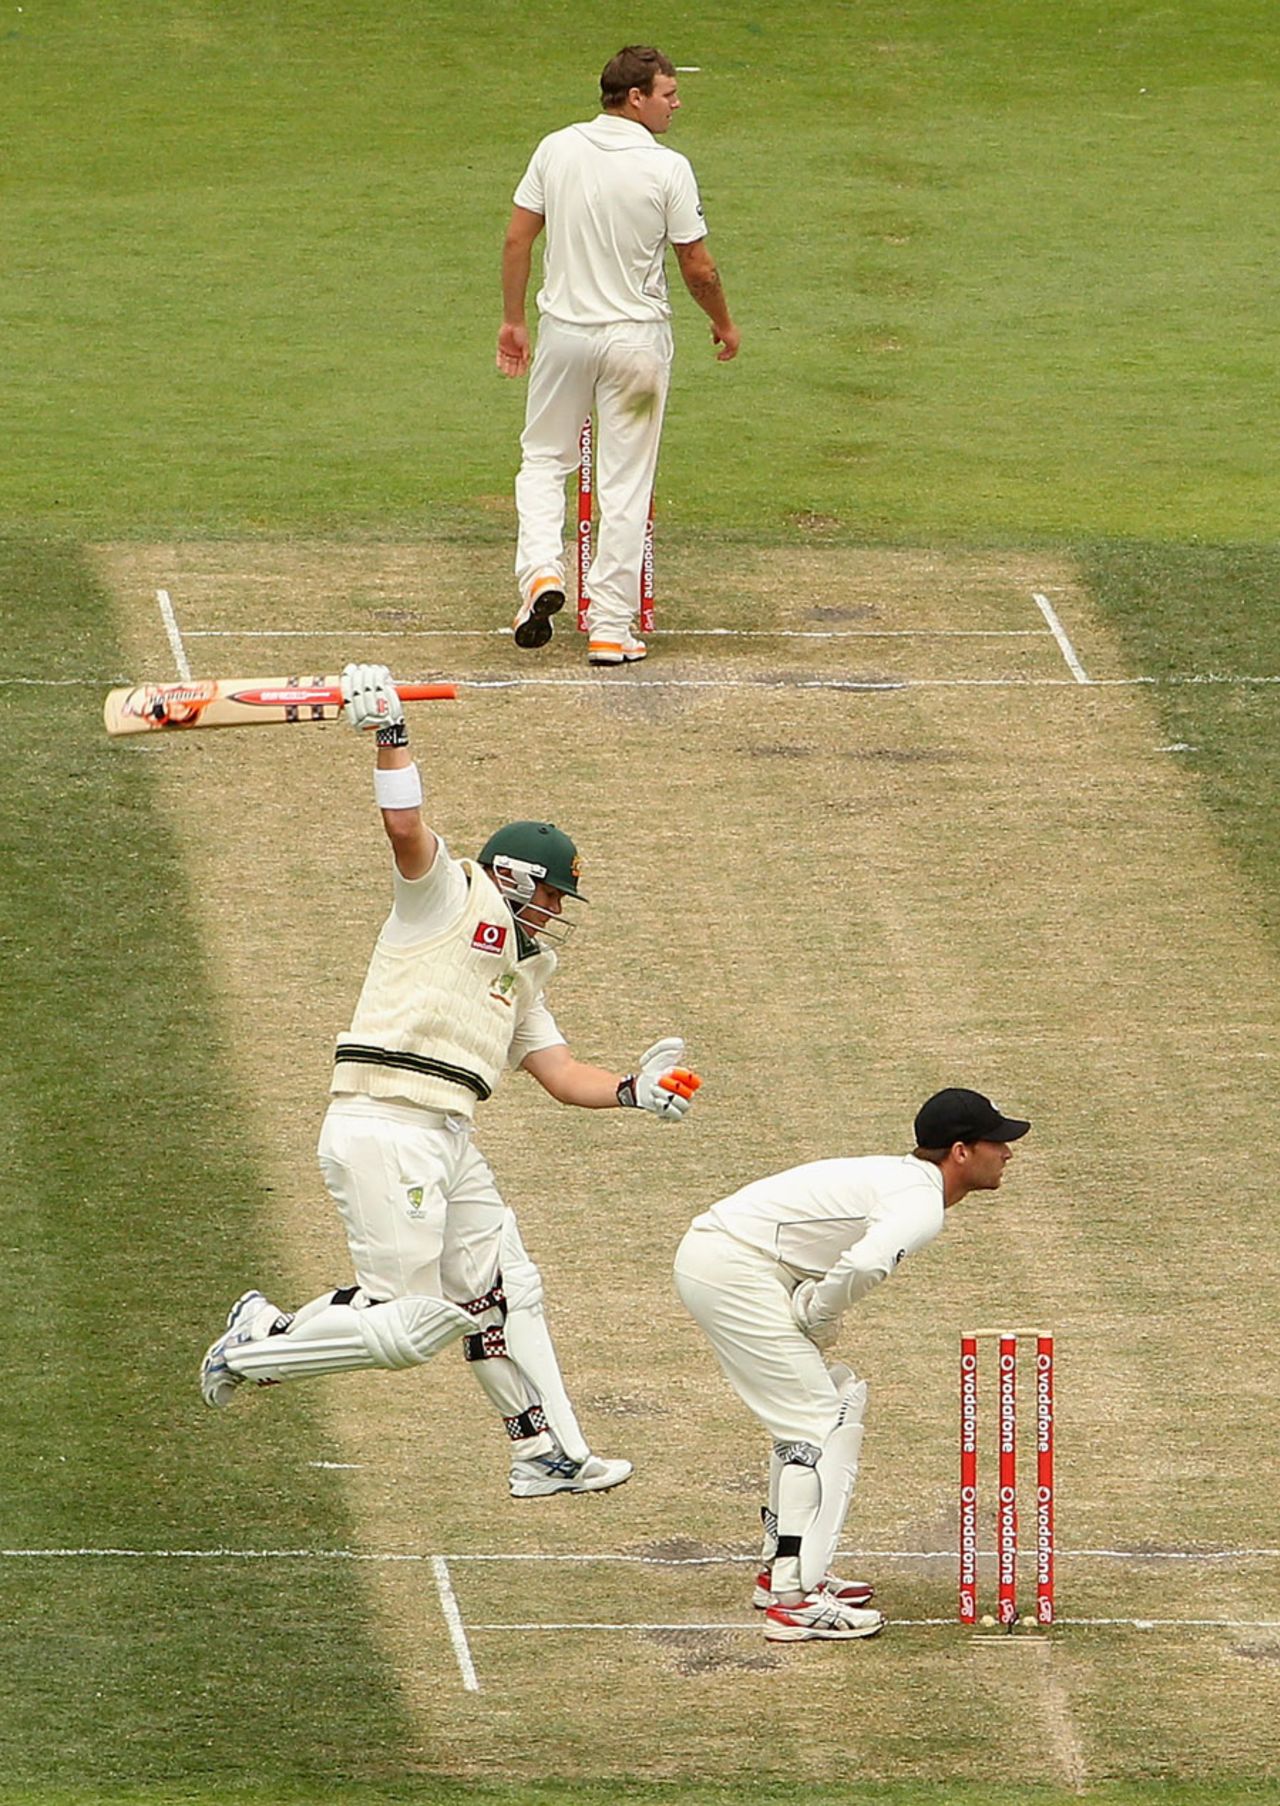 David Warner leaps for joy after reaching his century, Australia v New Zealand, 2nd Test, Hobart, 4th day, December 12 2011